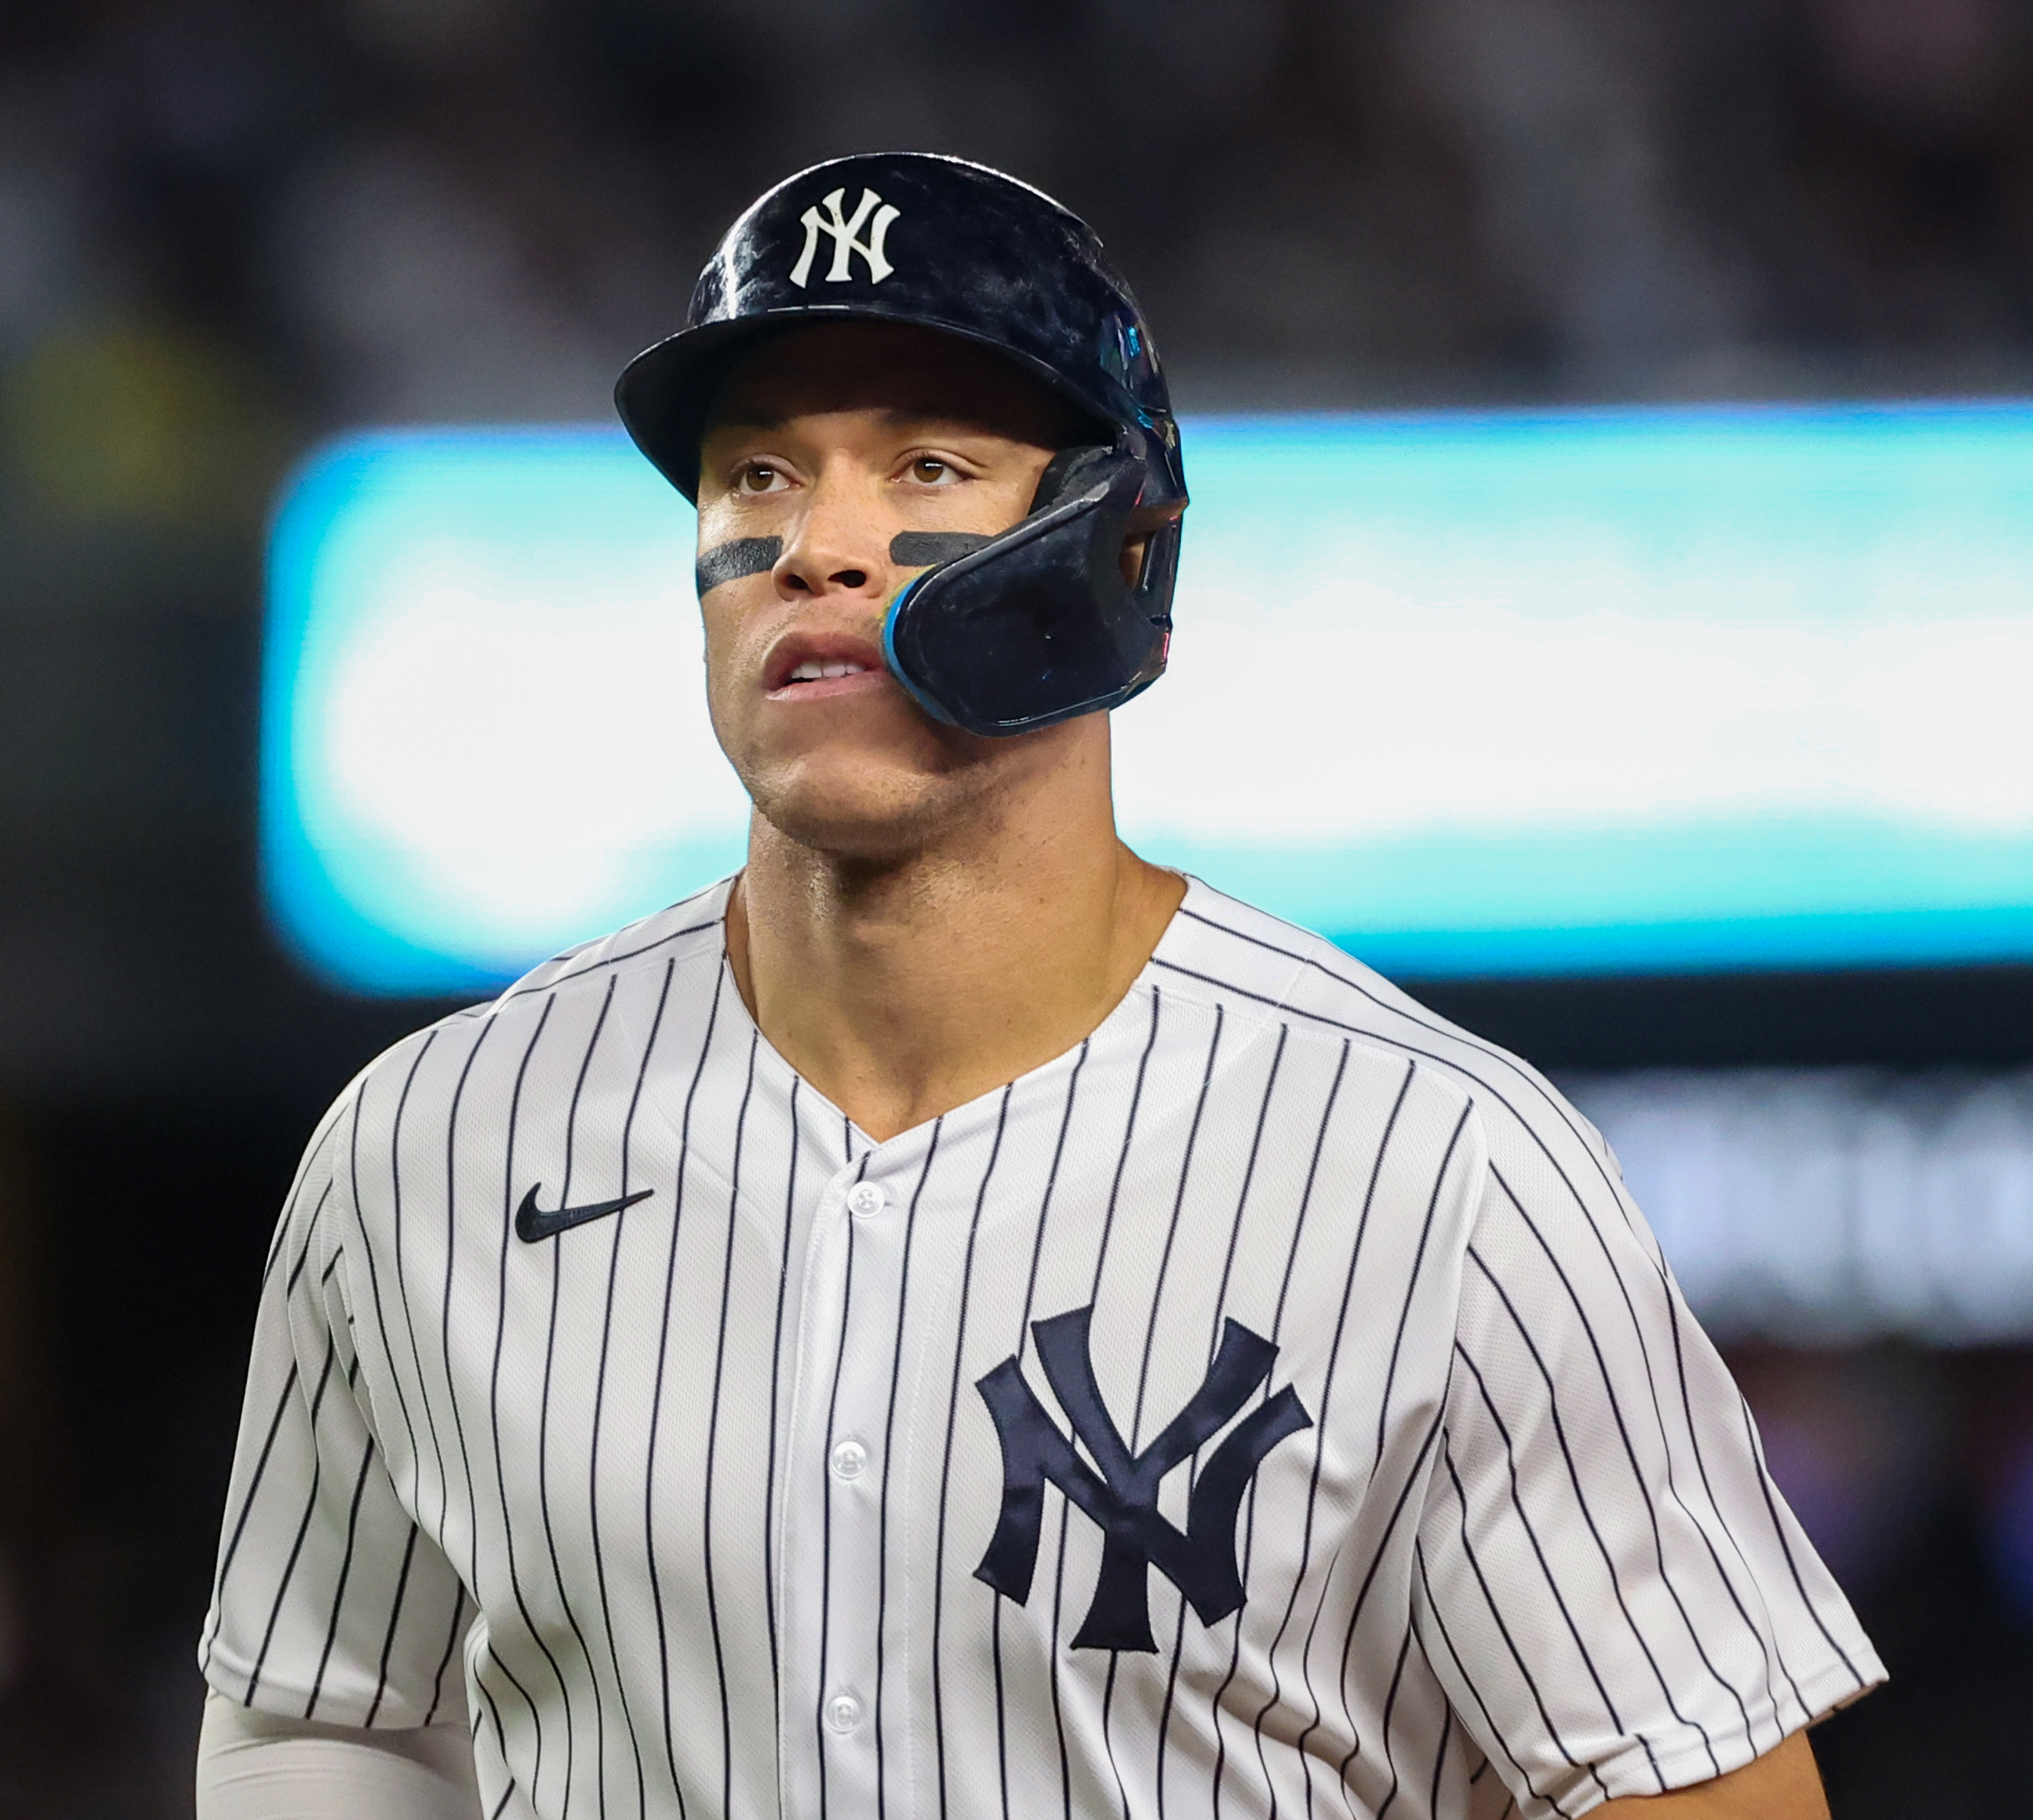 Yankees walk off, clinch playoff spot with 5-4 win over Red Sox